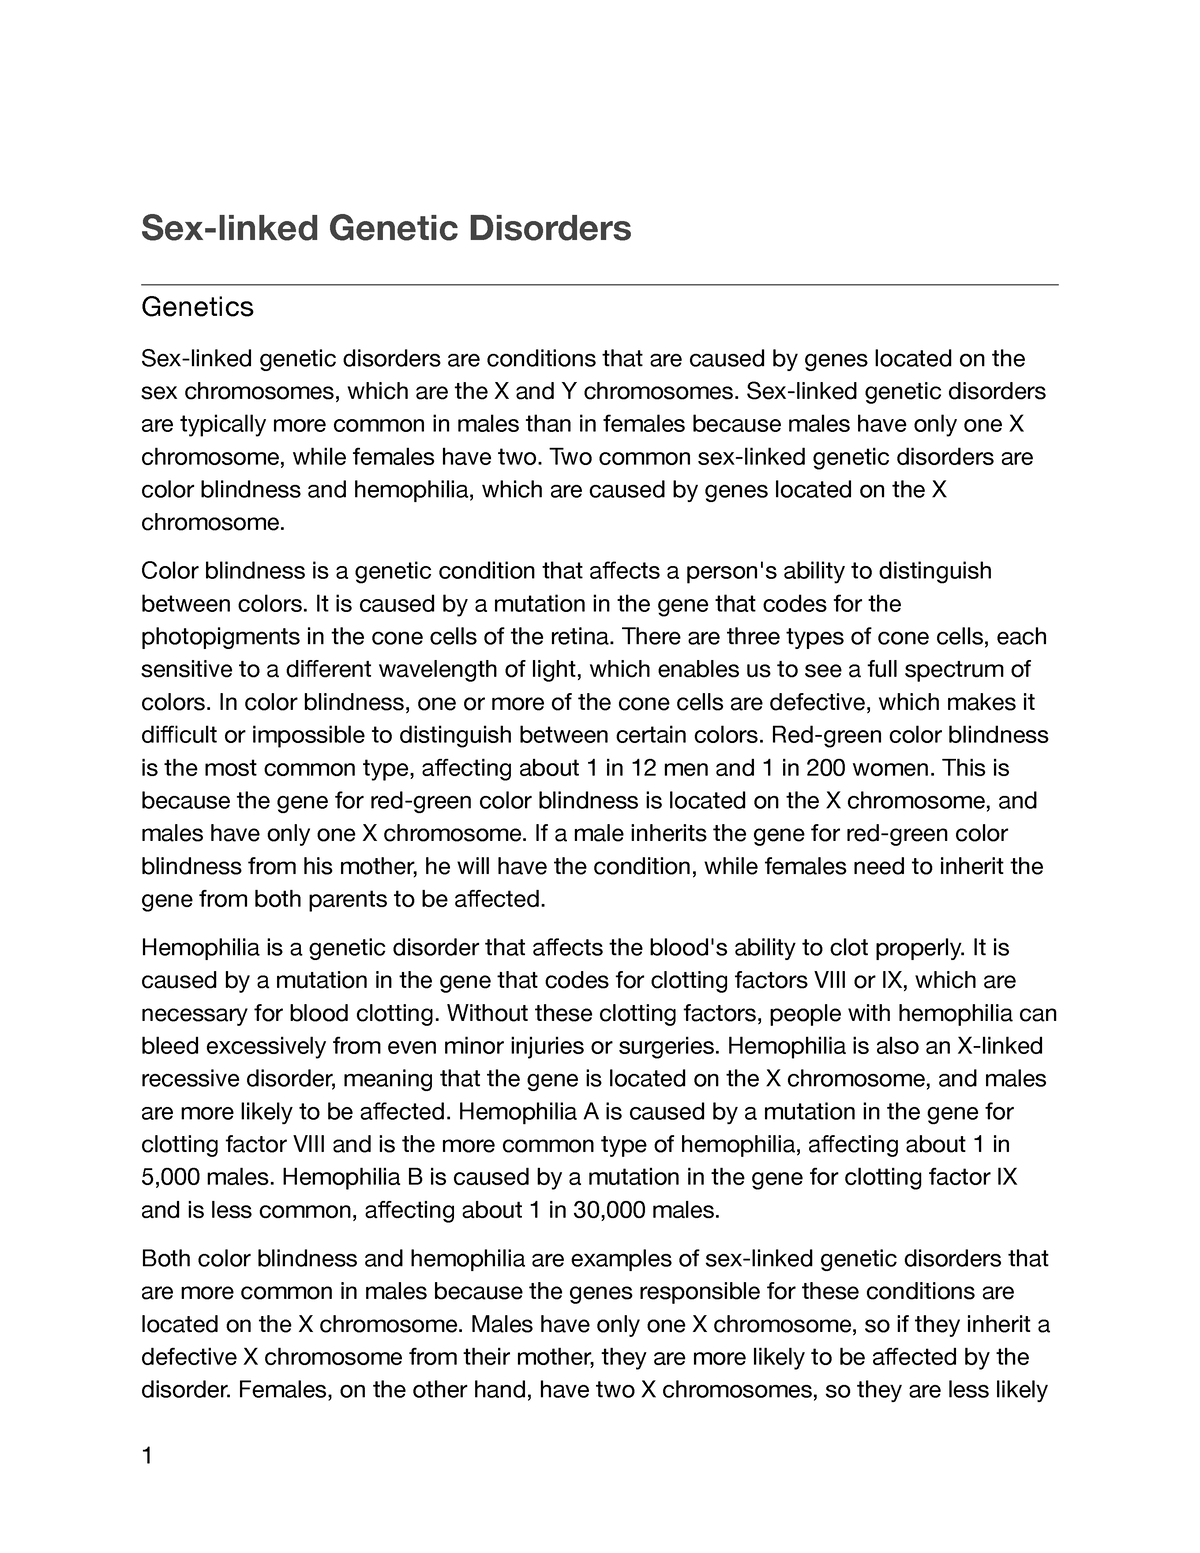 genetic disorders essay conclusion